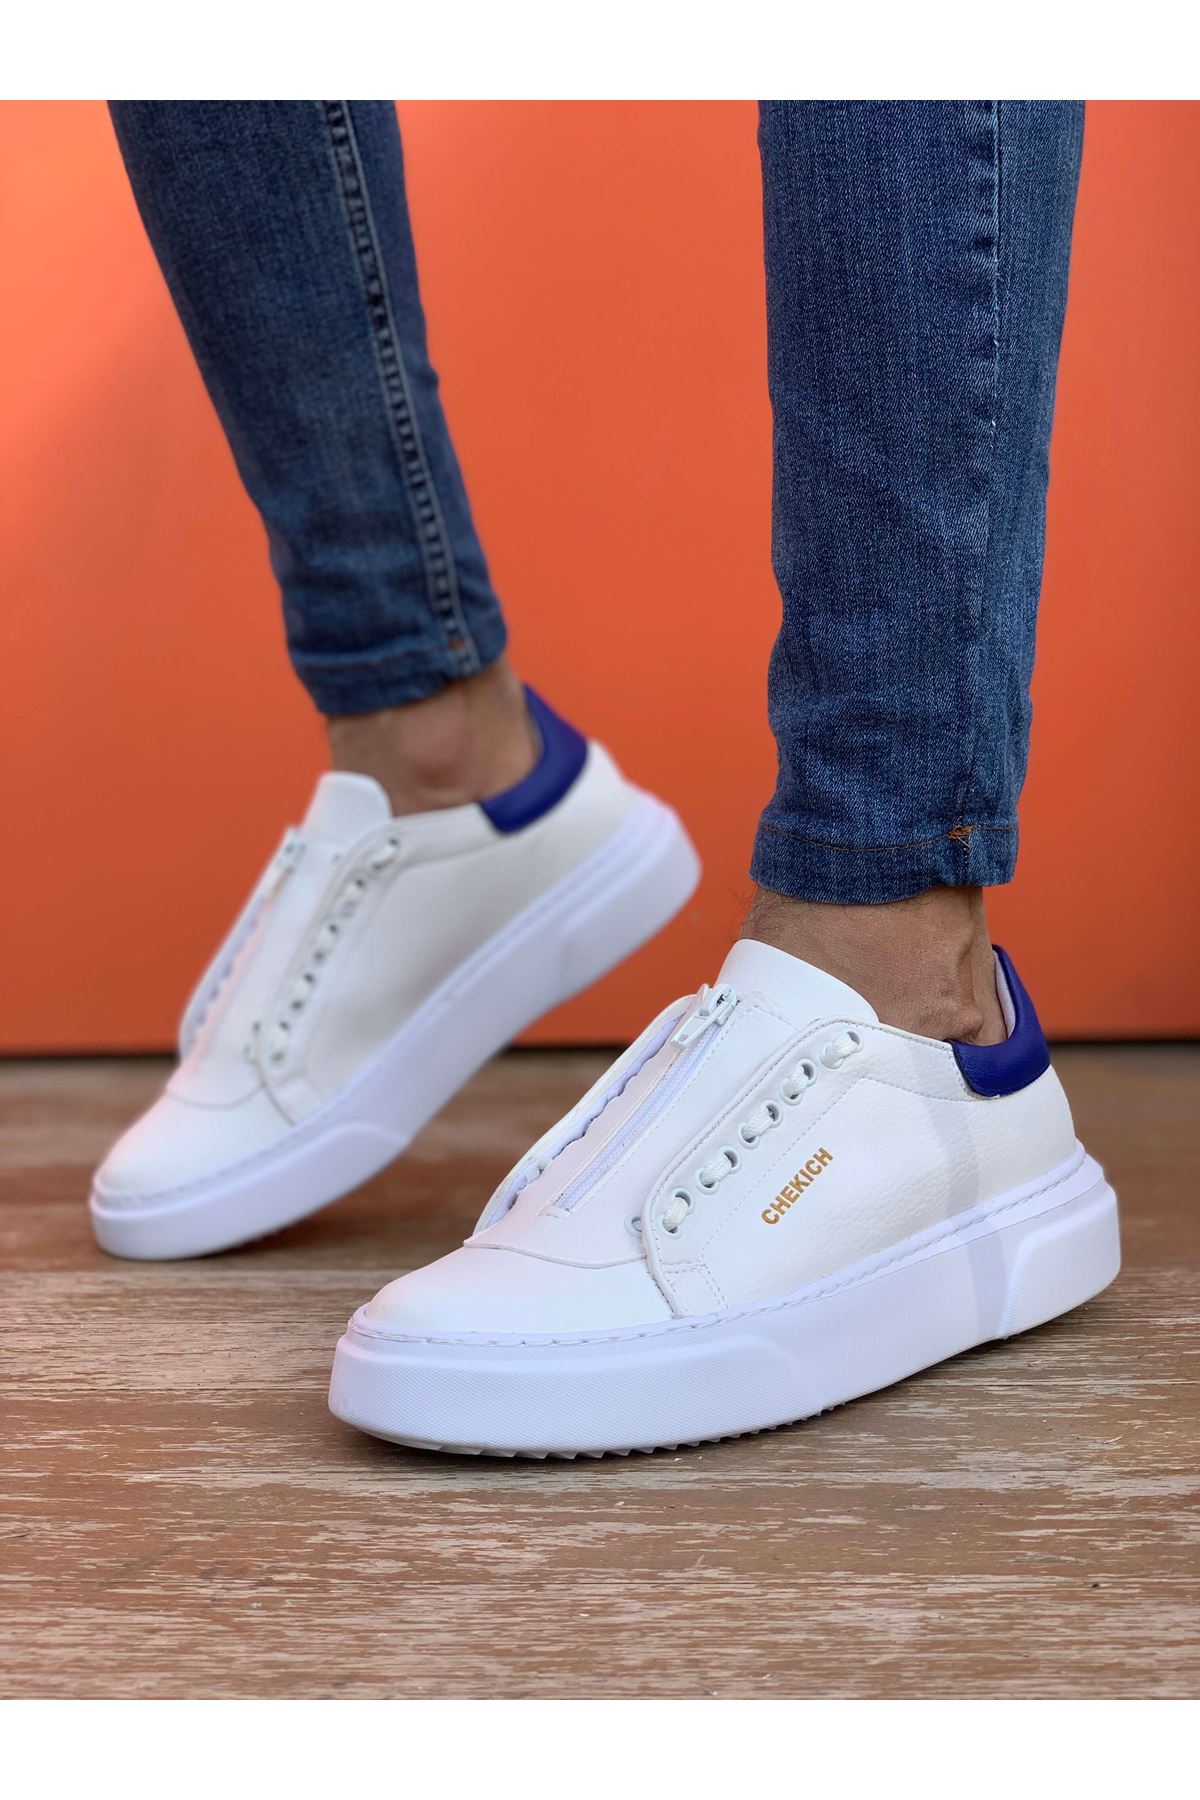 Chekich Men's Shoes White and Yellow Artificial Leather Zipper Closure Mixed Color Sneakers For Spring Season Casual Sport Breathable Light Flexible Air Vulcanized Sewing Base Lace Details New Orange Office CH092 V6